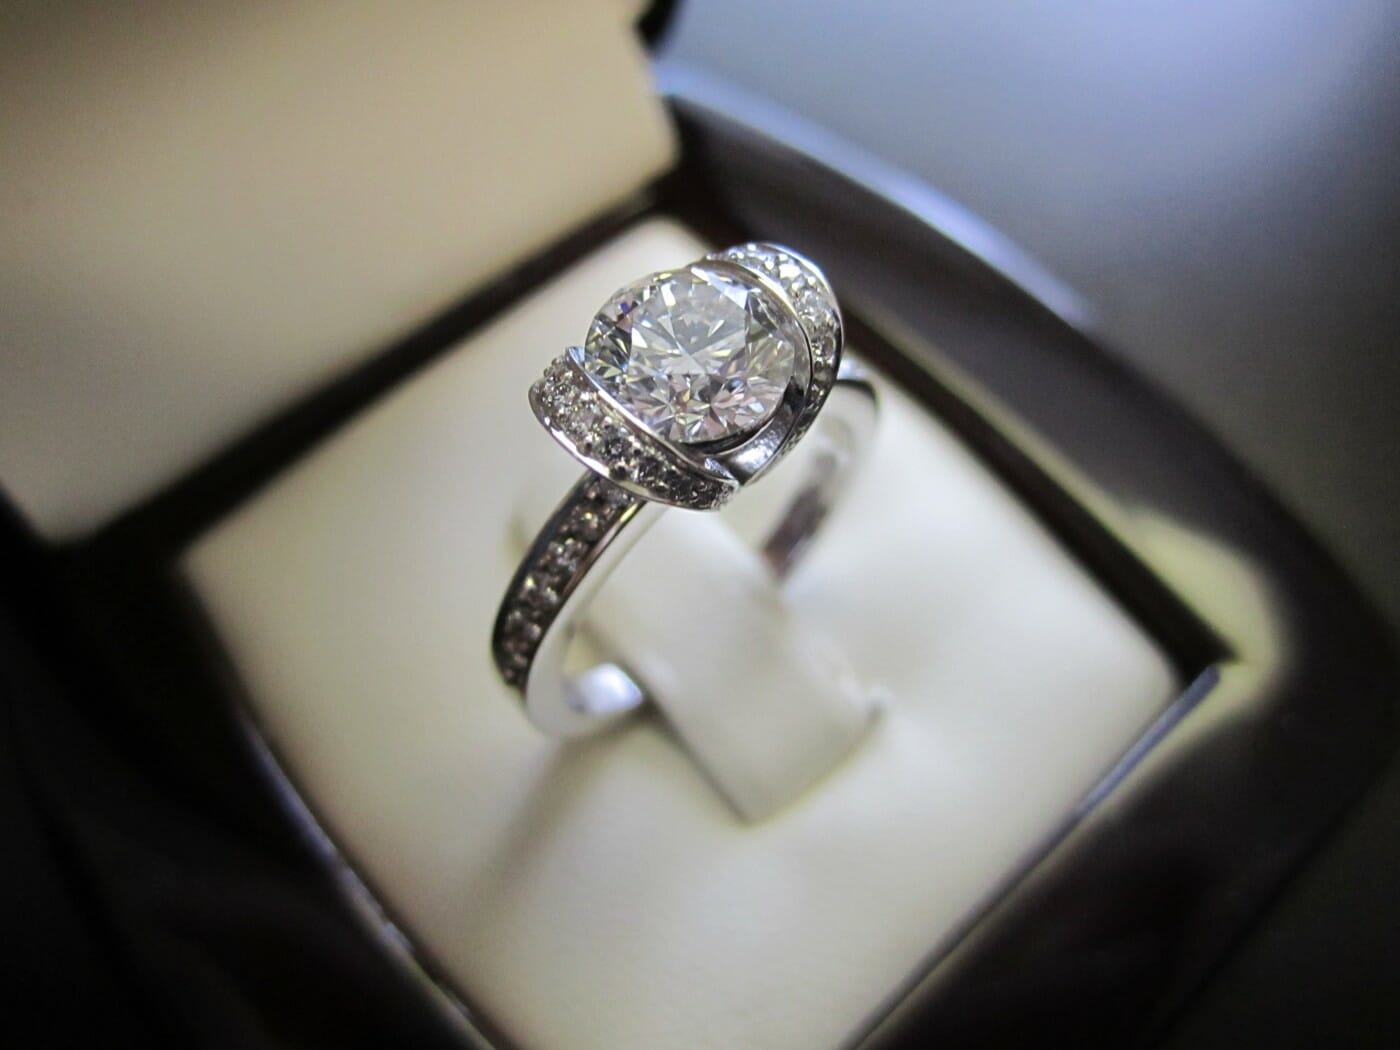 Picture of Widow’s delight at return of lost engagement ring